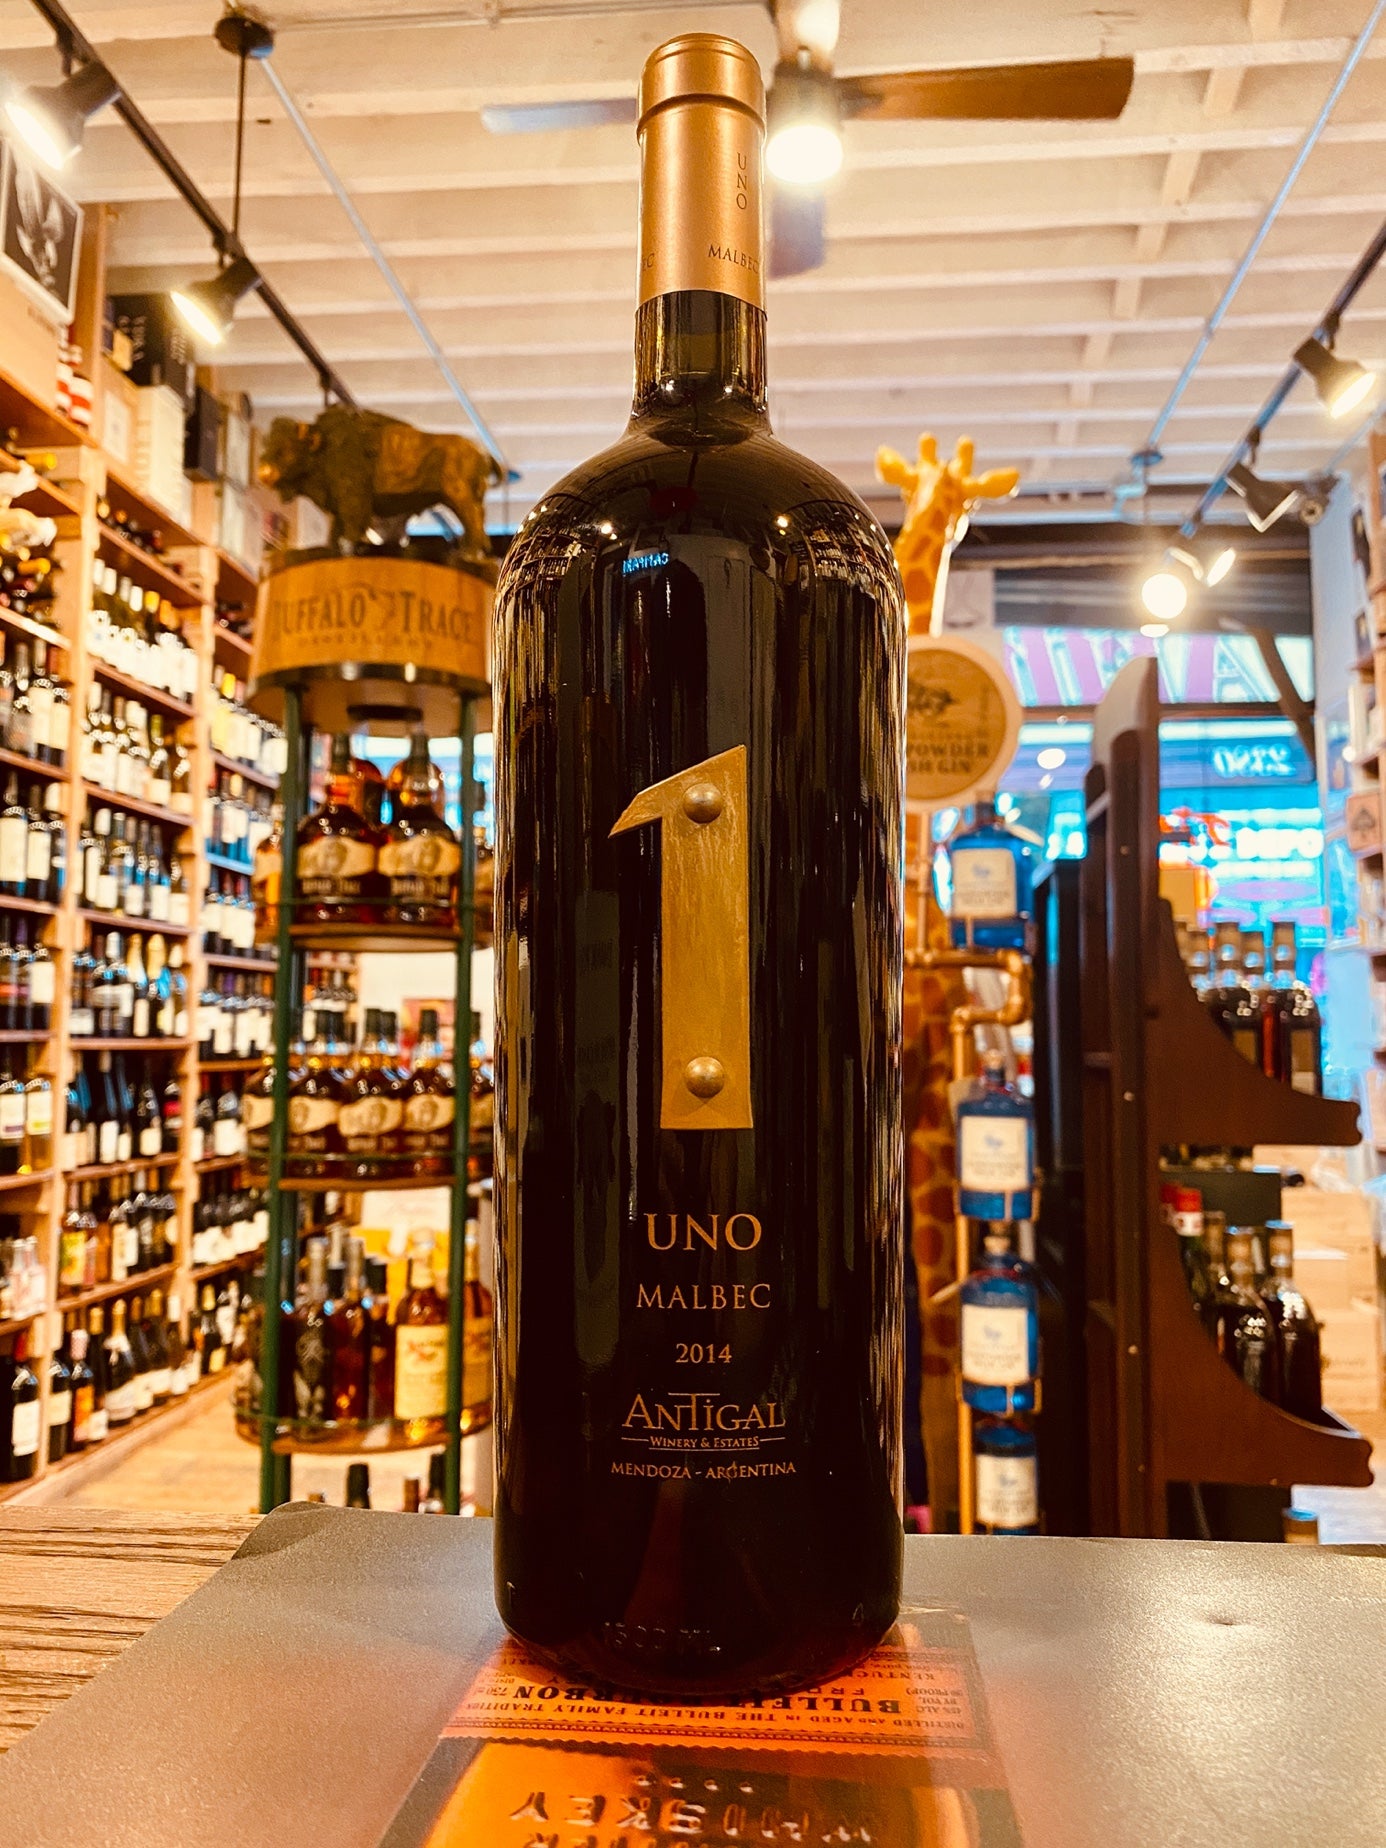 Antigal Malbec Uno 1.5L large dark bottle with a gold top